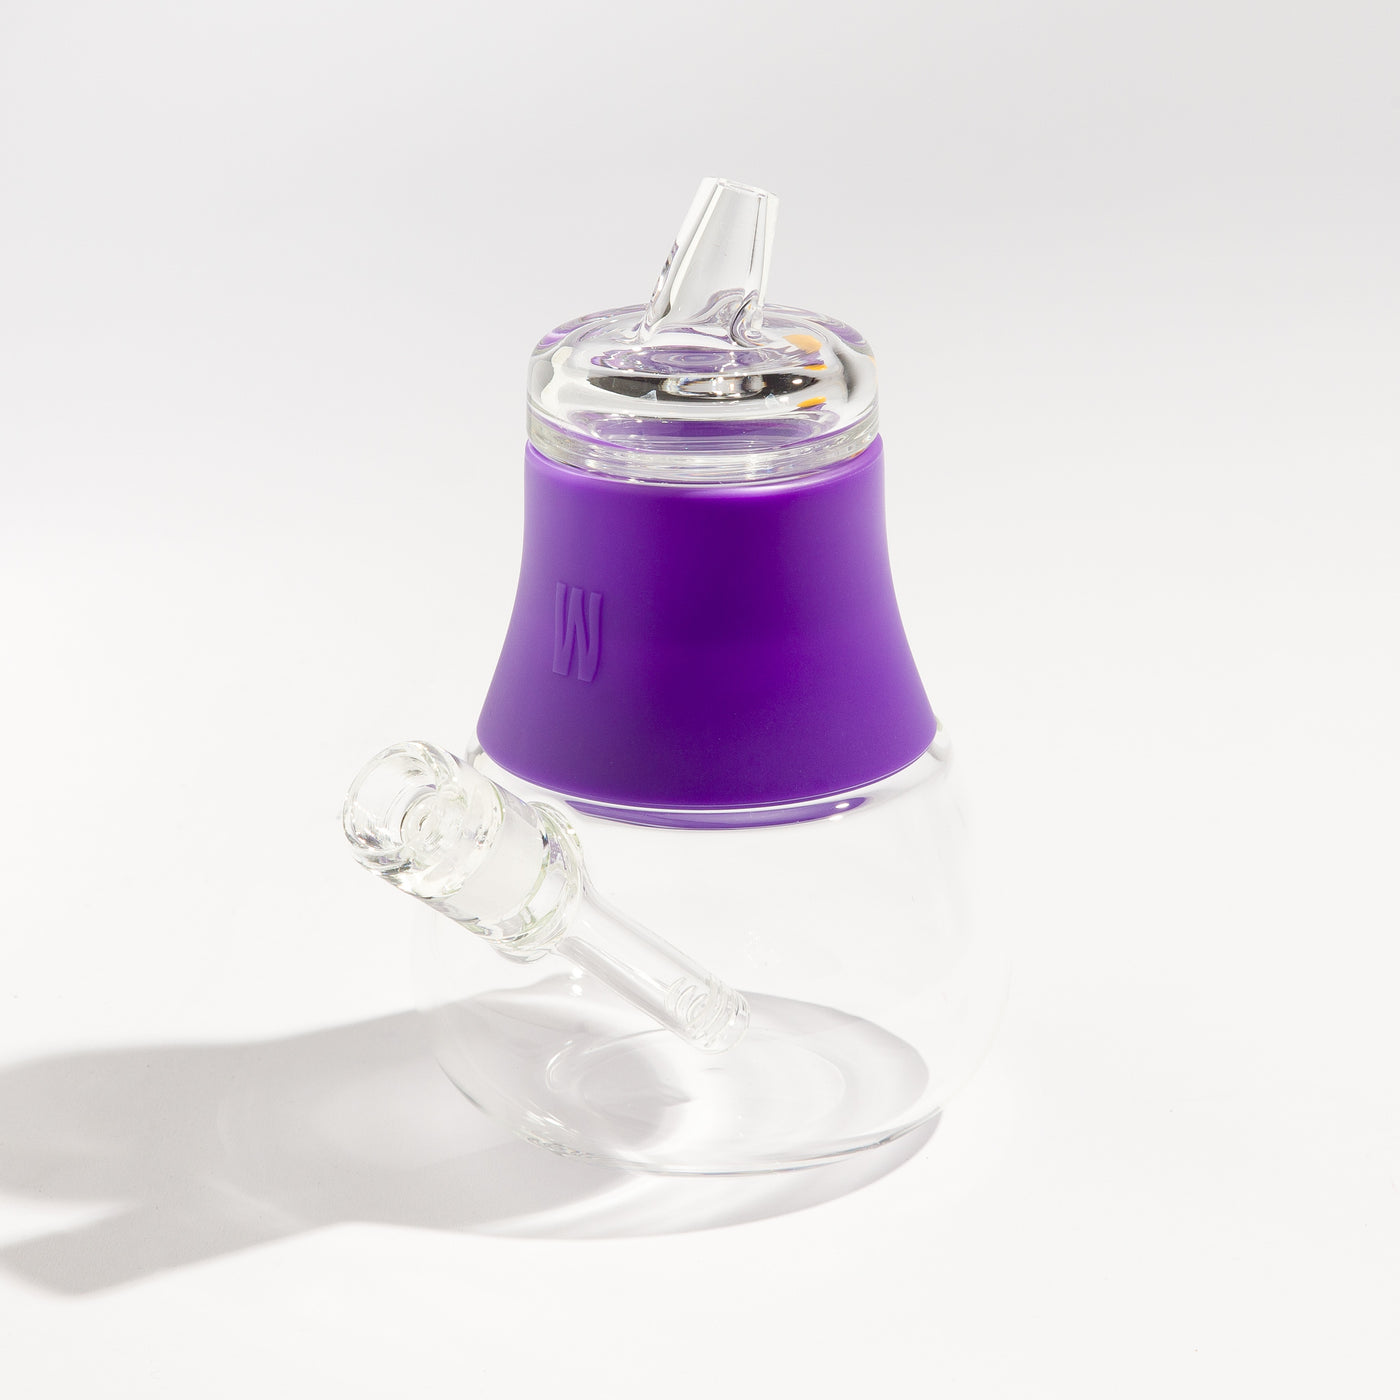 Product photo of a travel-friendly modular glass bubbler with grape purple silicone accents, displayed on a table.